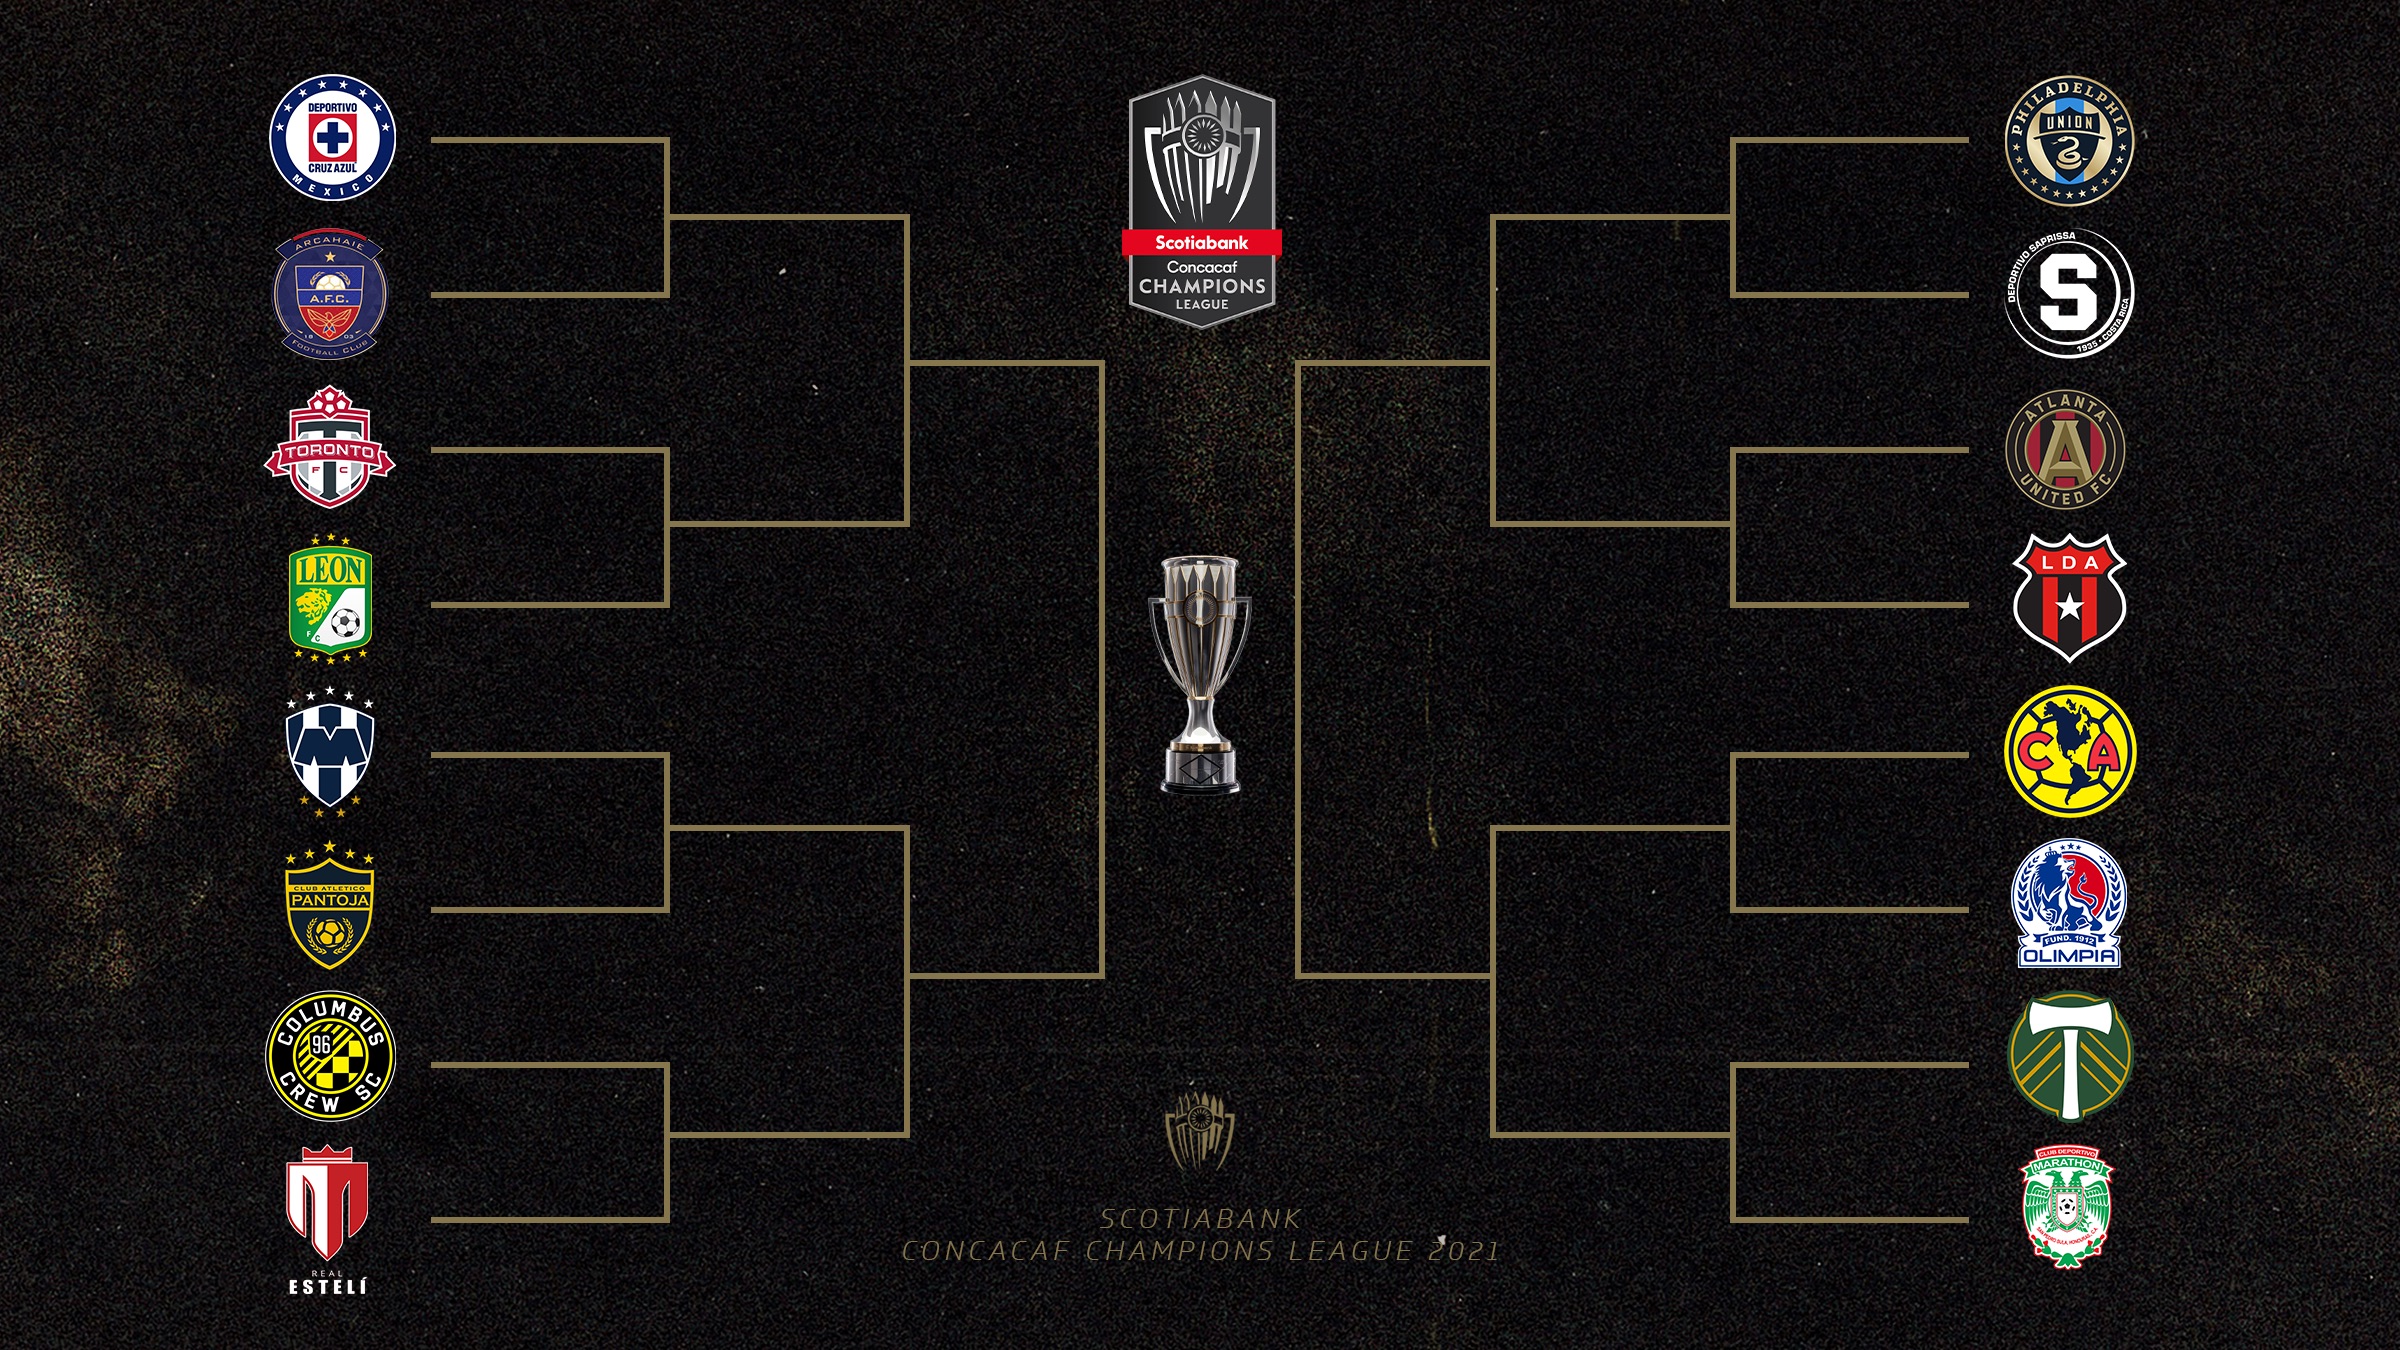 Concacaf champions league updated bracket Concacaf Nations League 2021